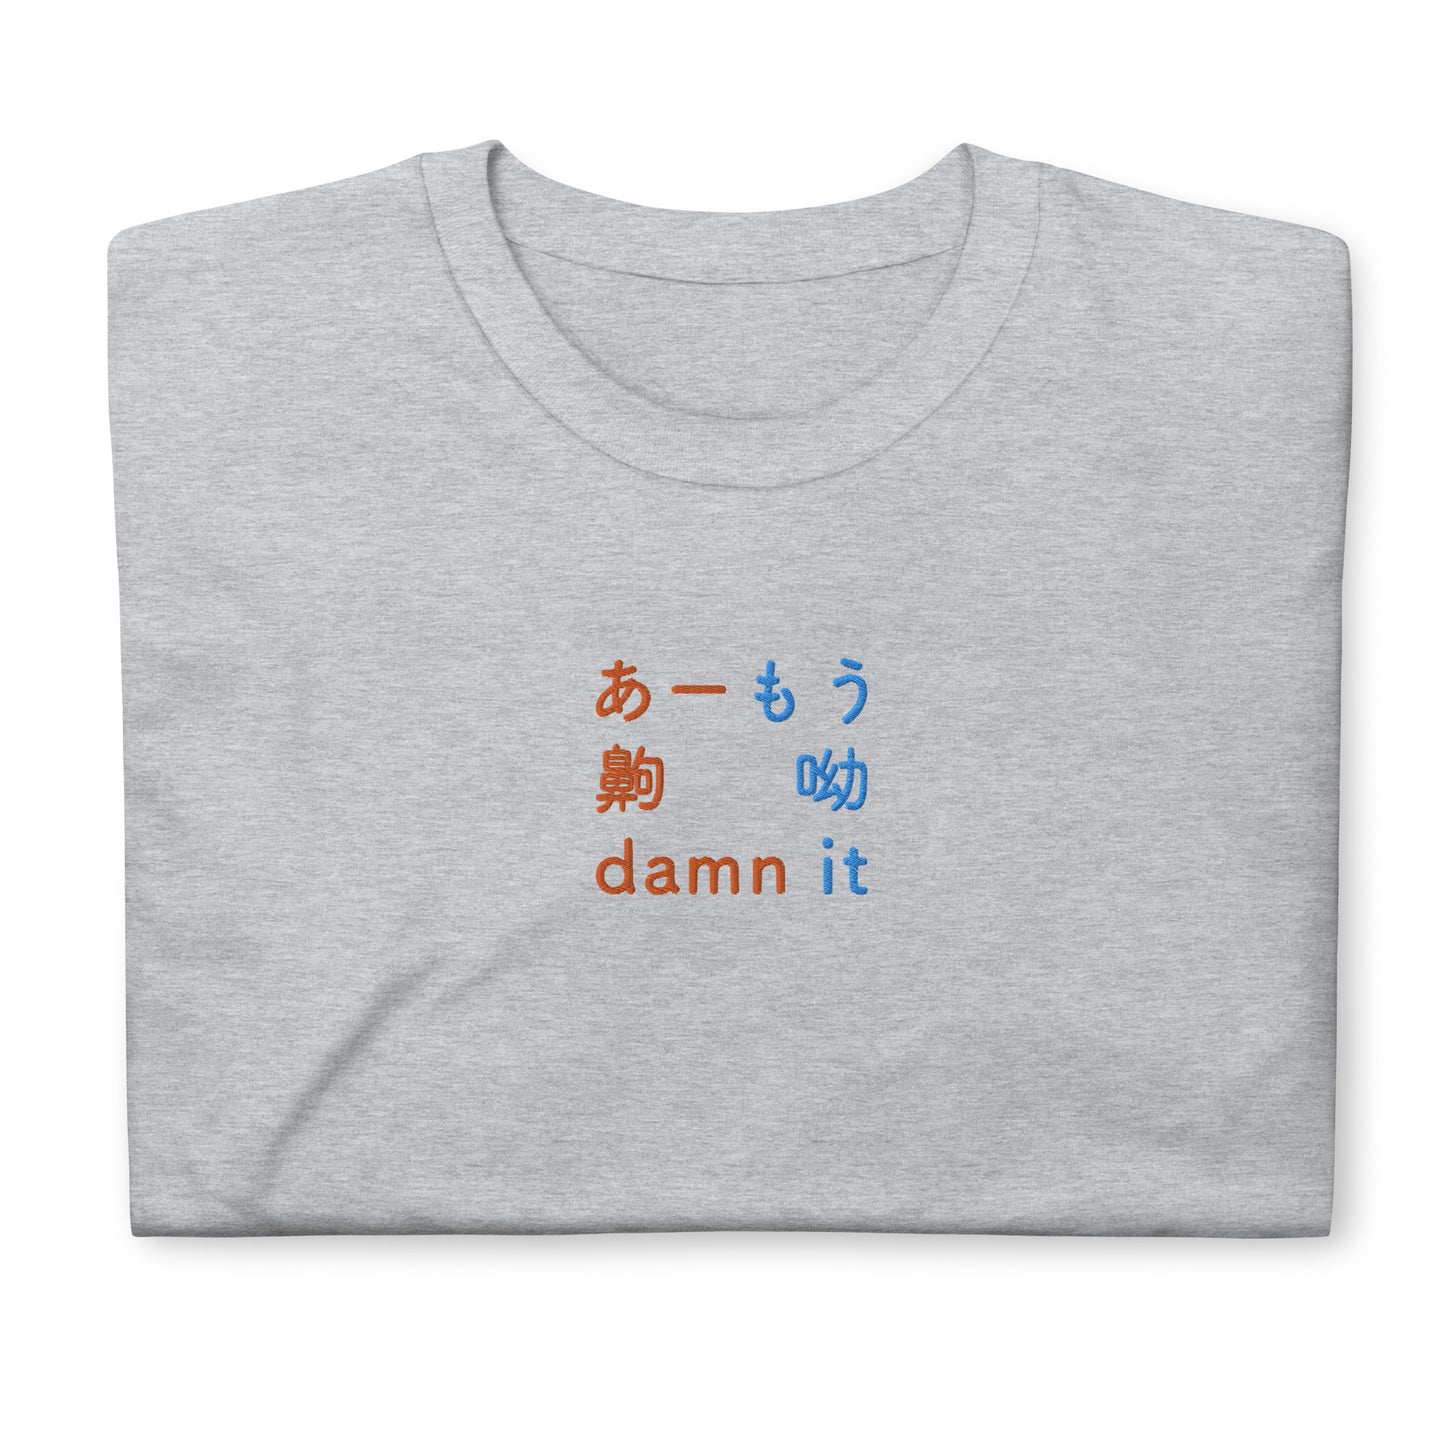 Light Gray High Quality Tee - Front Design with an Orange,Blue Embroidery "Damn it" in Japanese,Chinese and English